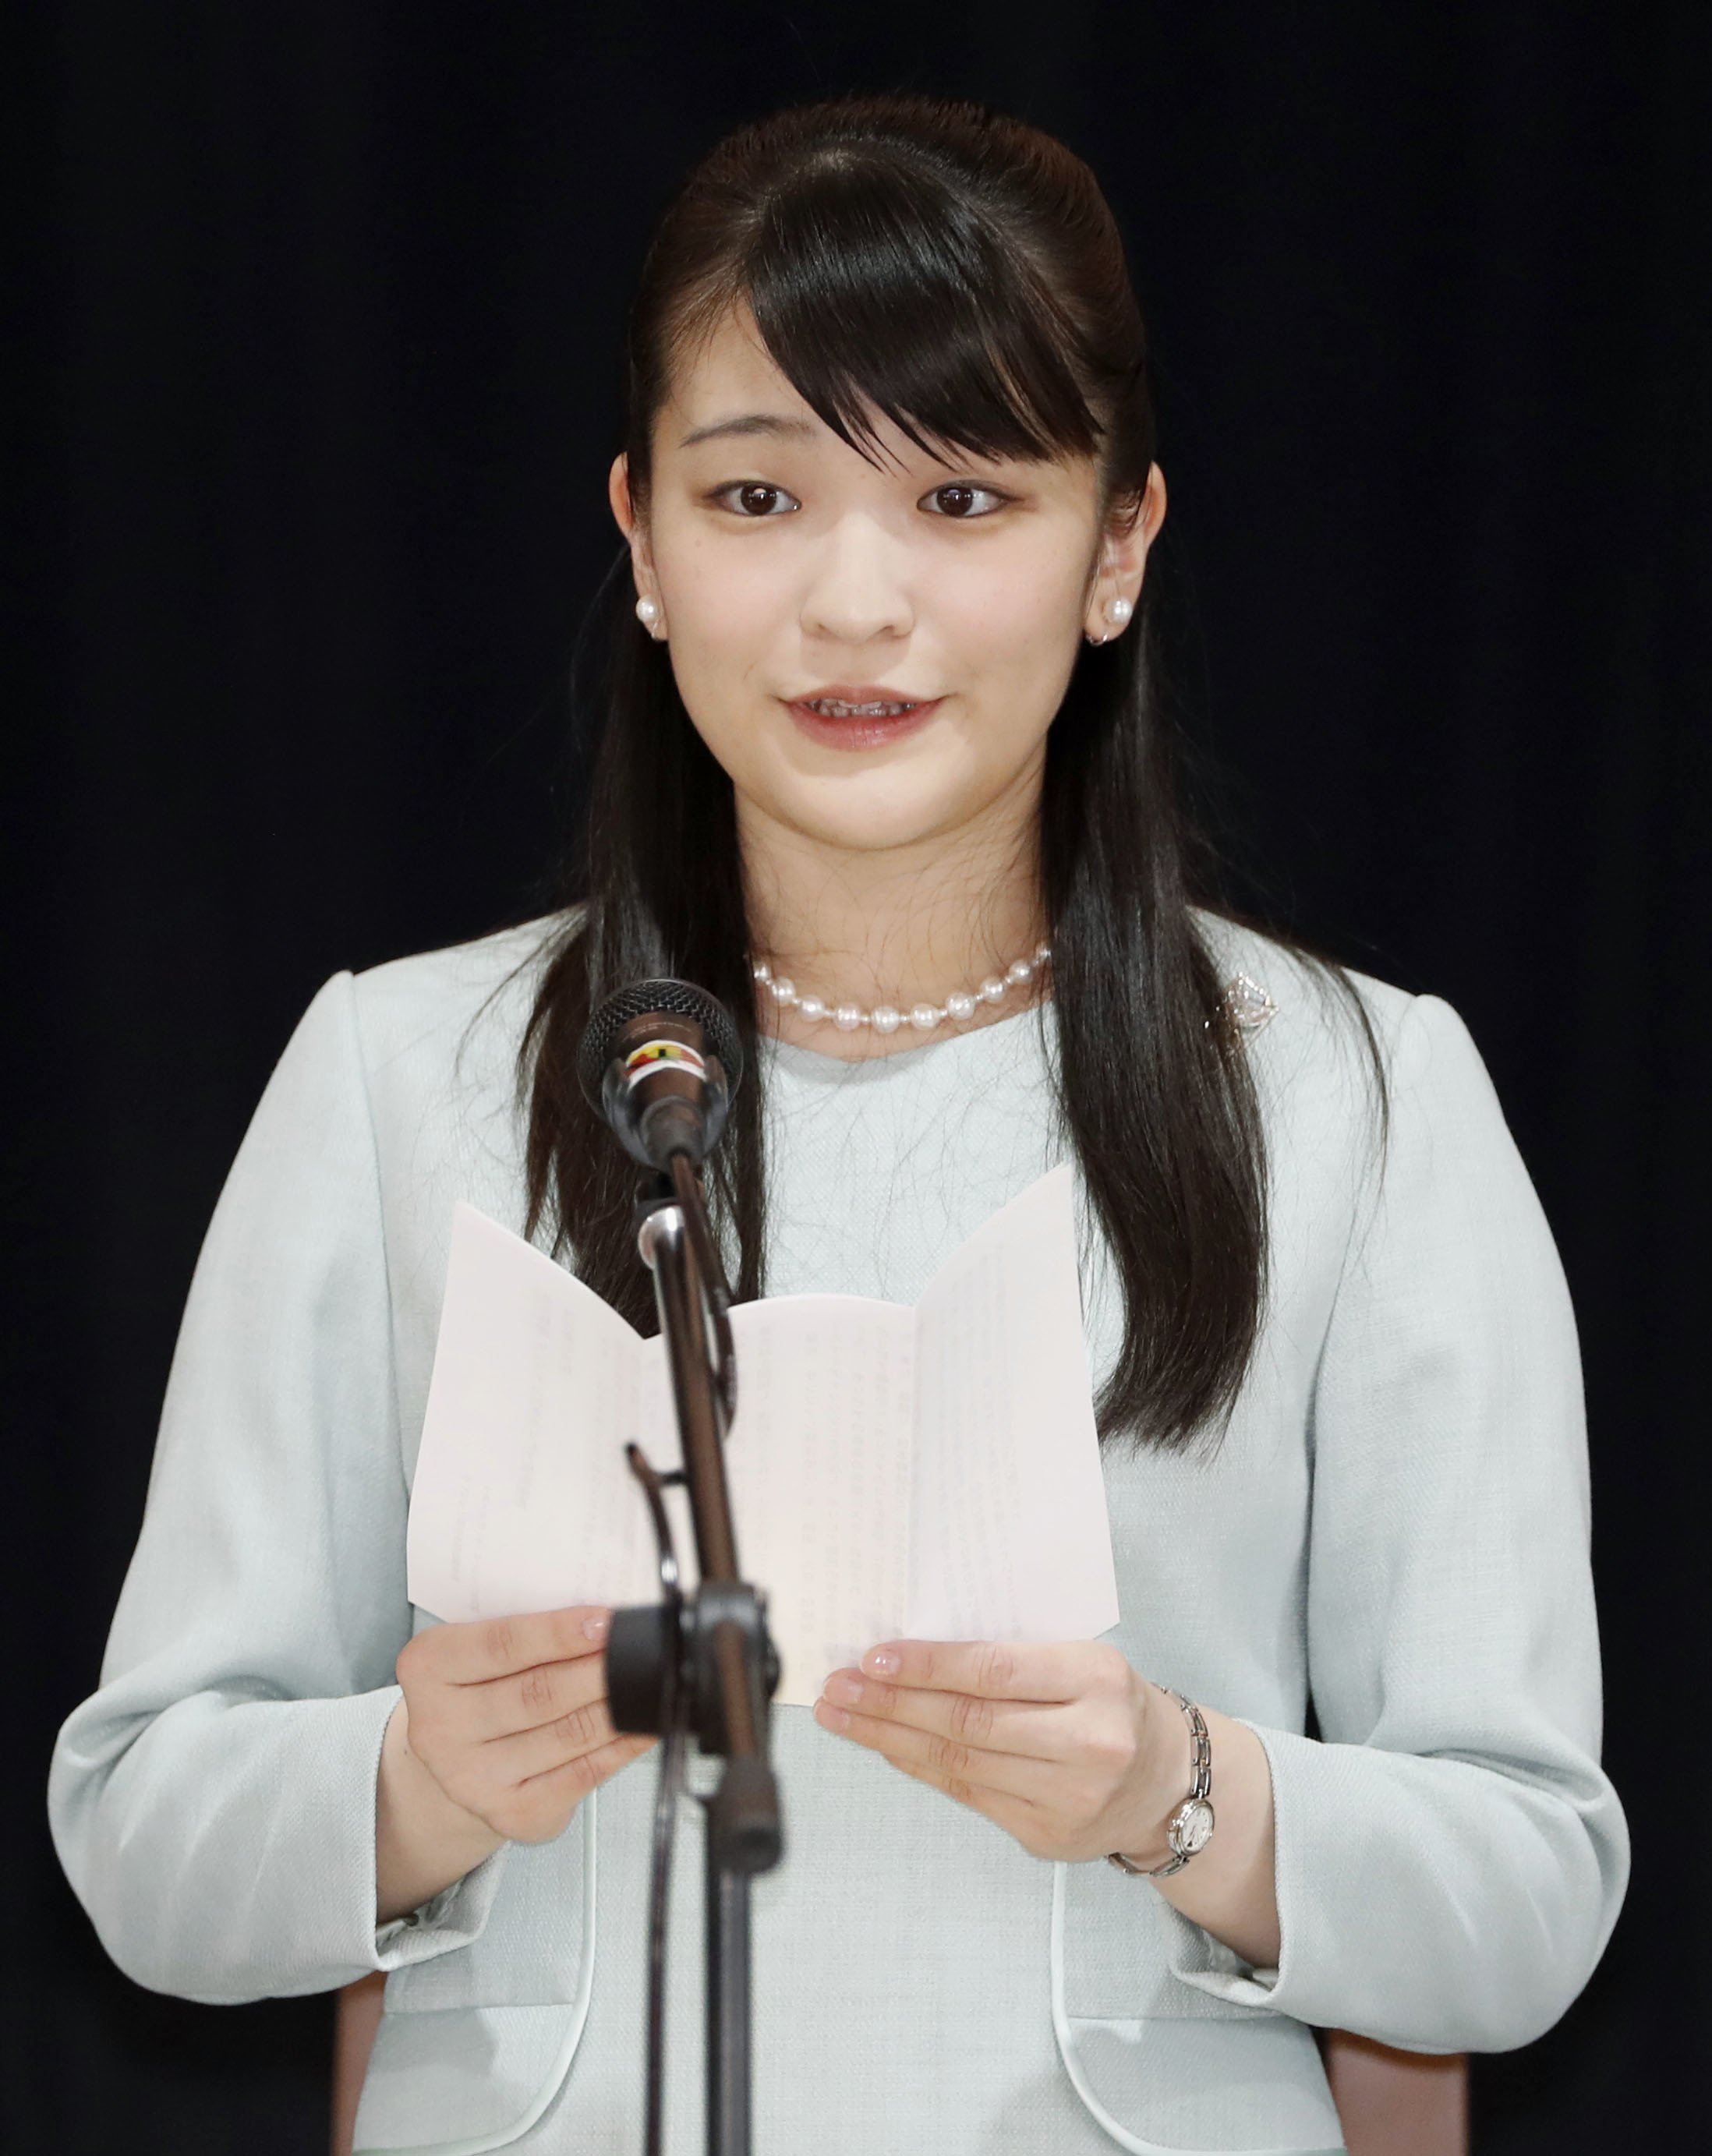 Japanese Princess Mako Gave up Royal Title Money to Marry Her